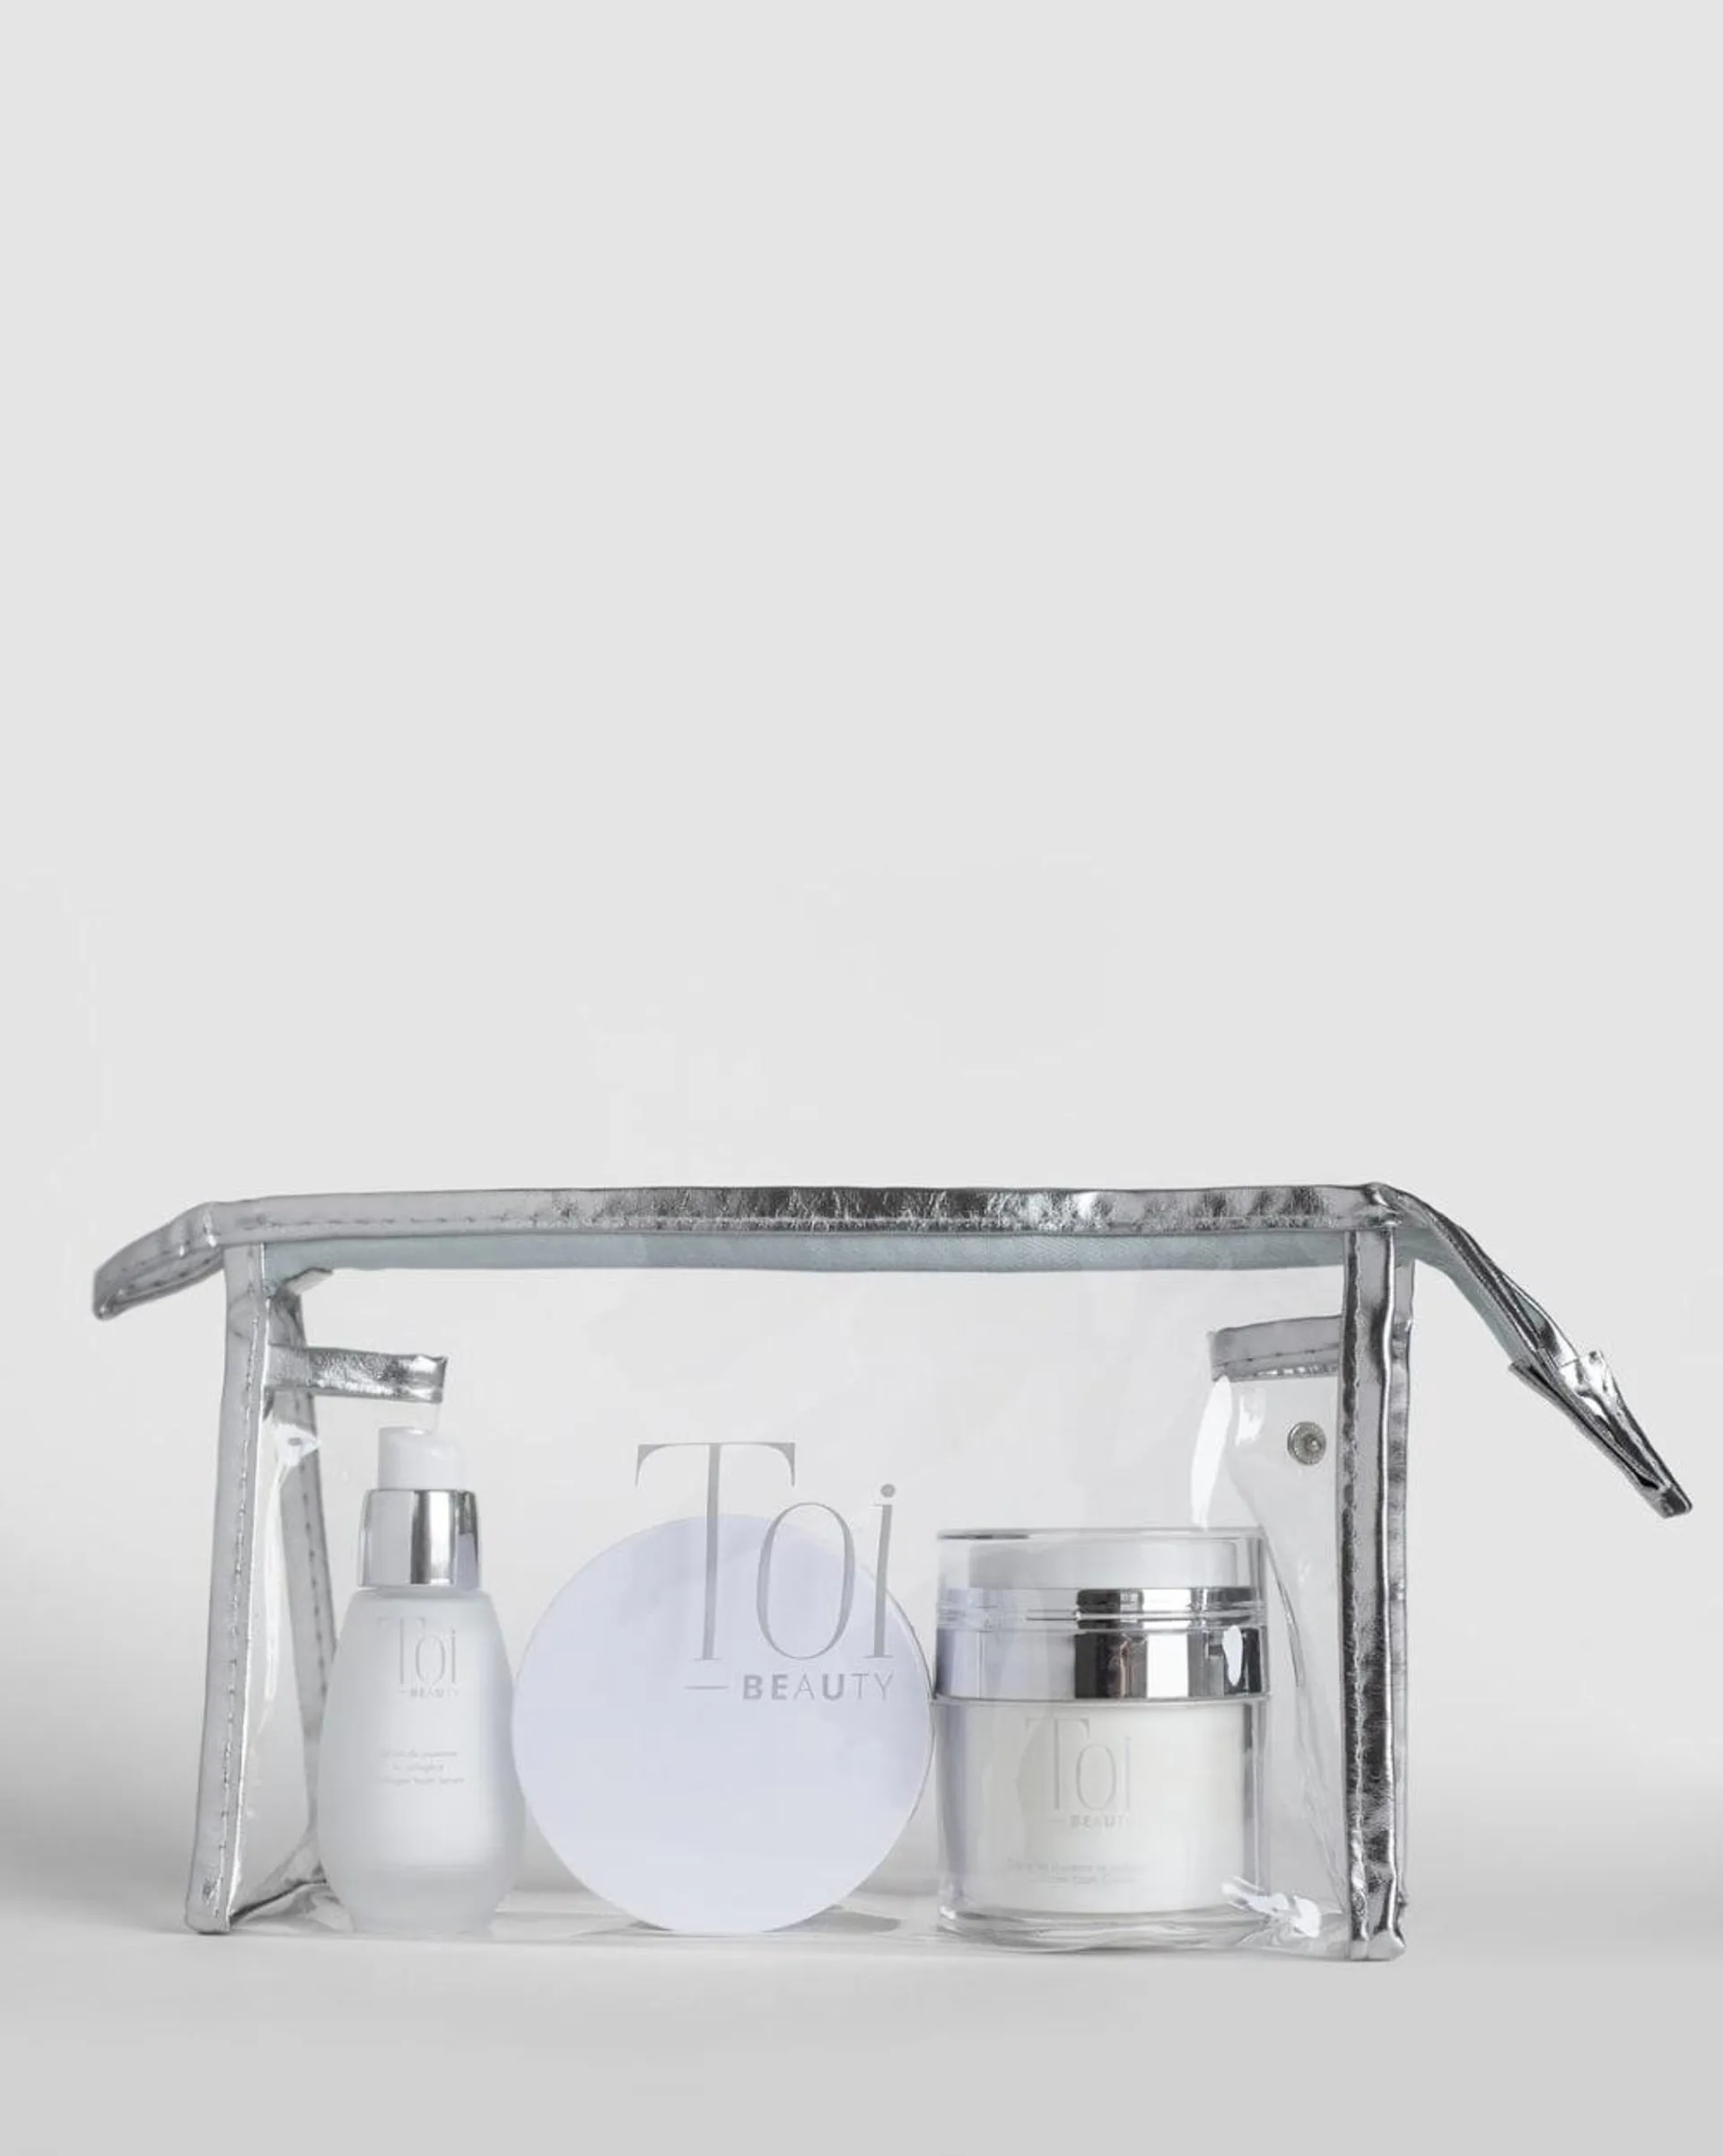 Toi Beauty – Collagen Youth Skincare Trio